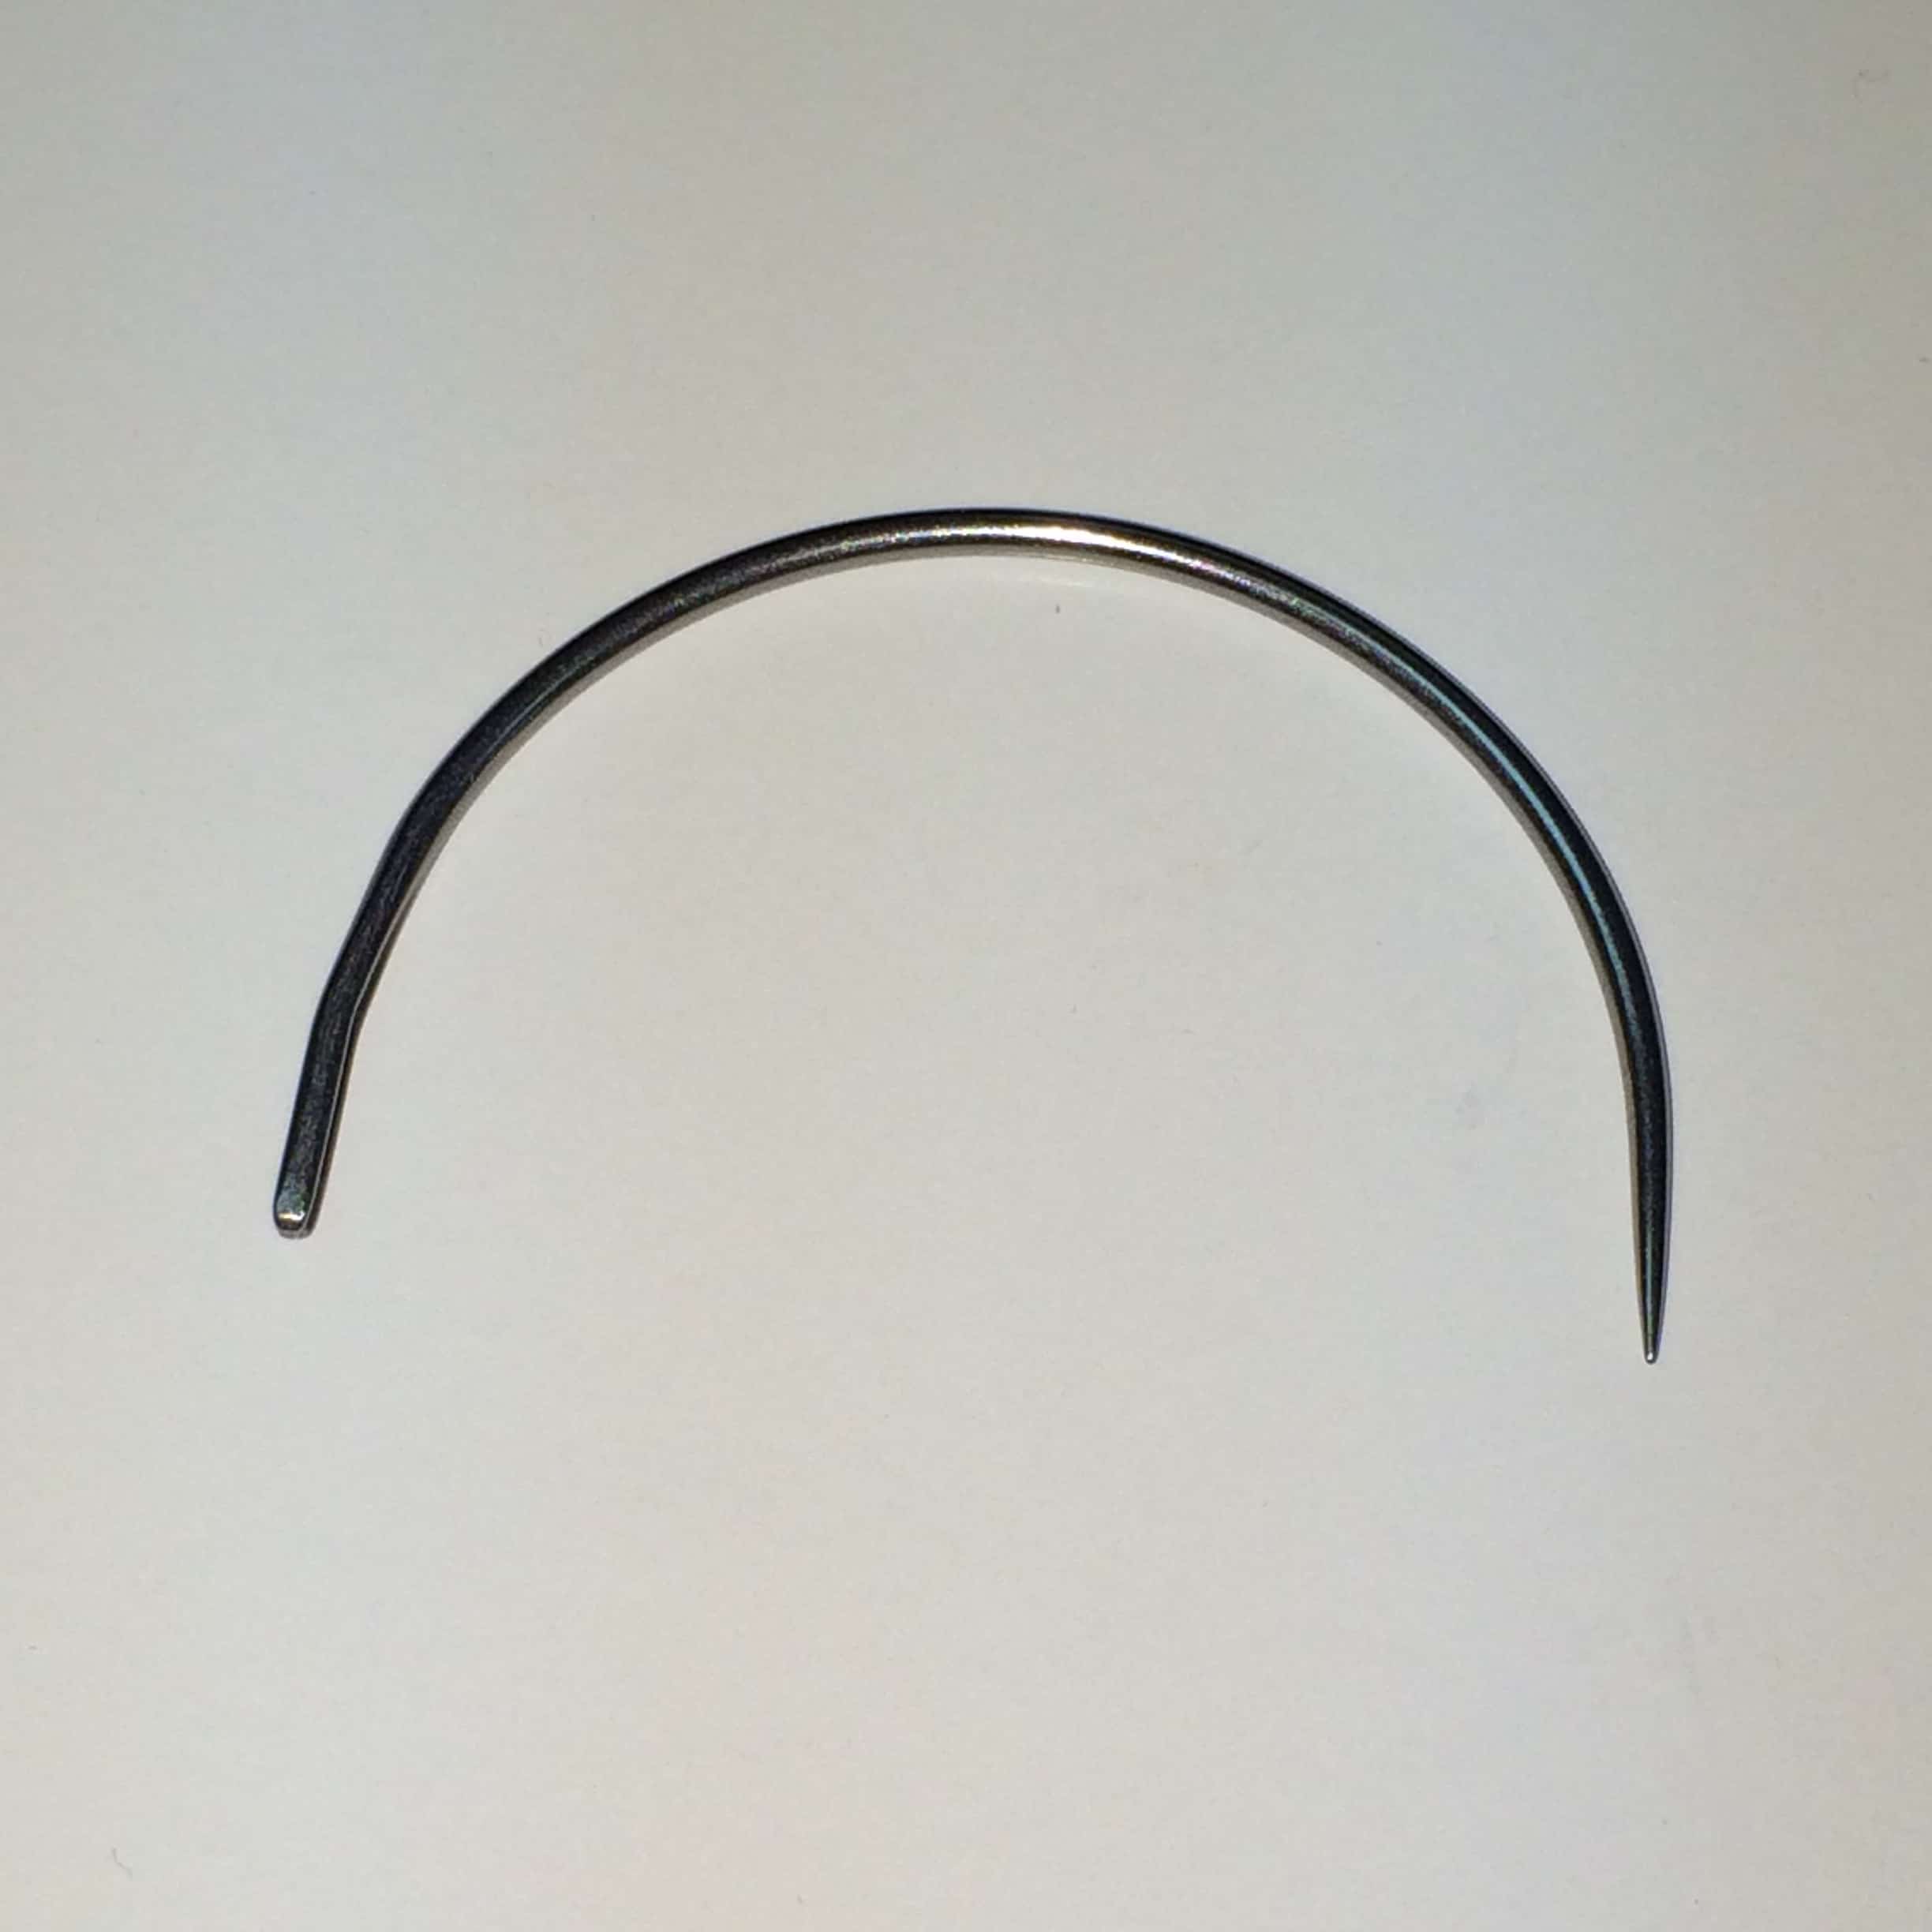 Uses for Curved Sewing Needles - Bond Products Inc